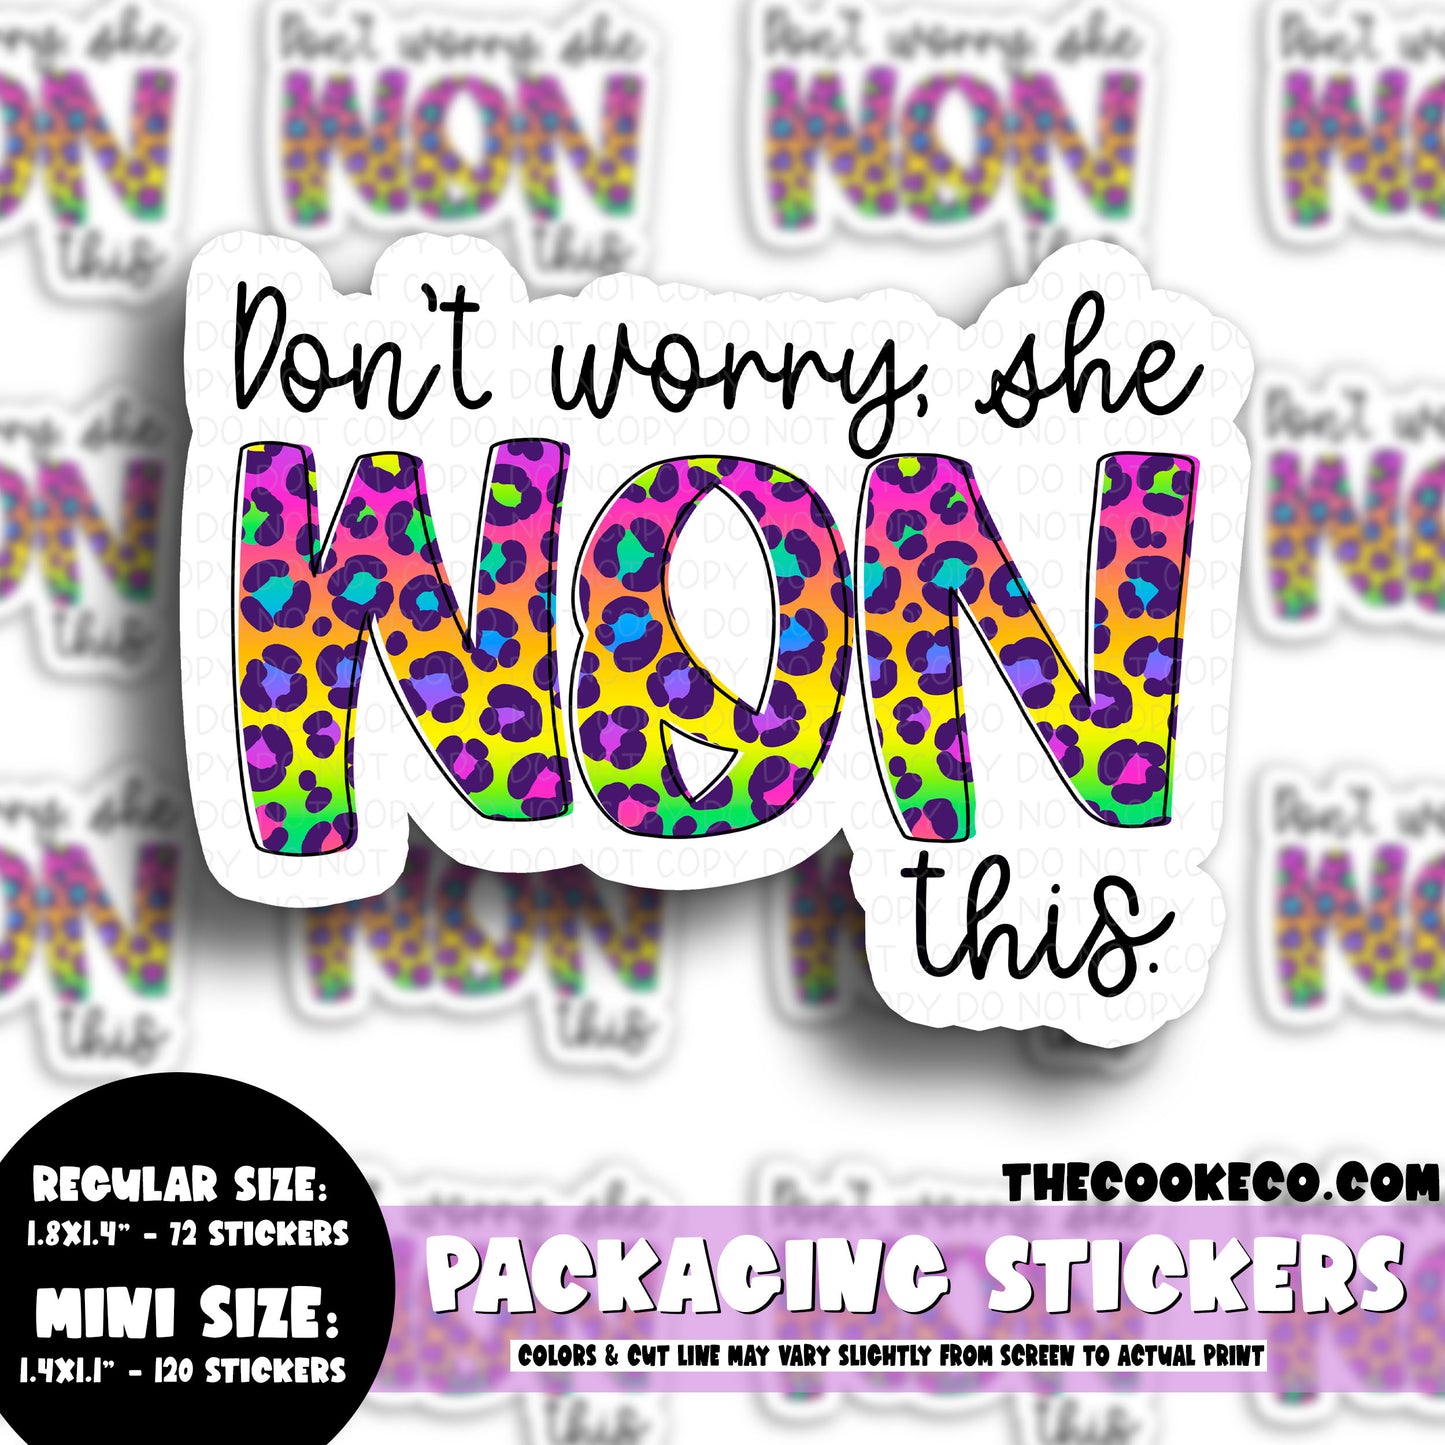 Packaging Stickers | #C0539 - DON'T WORRY SHE WON THIS RAINBOW LEOPARD